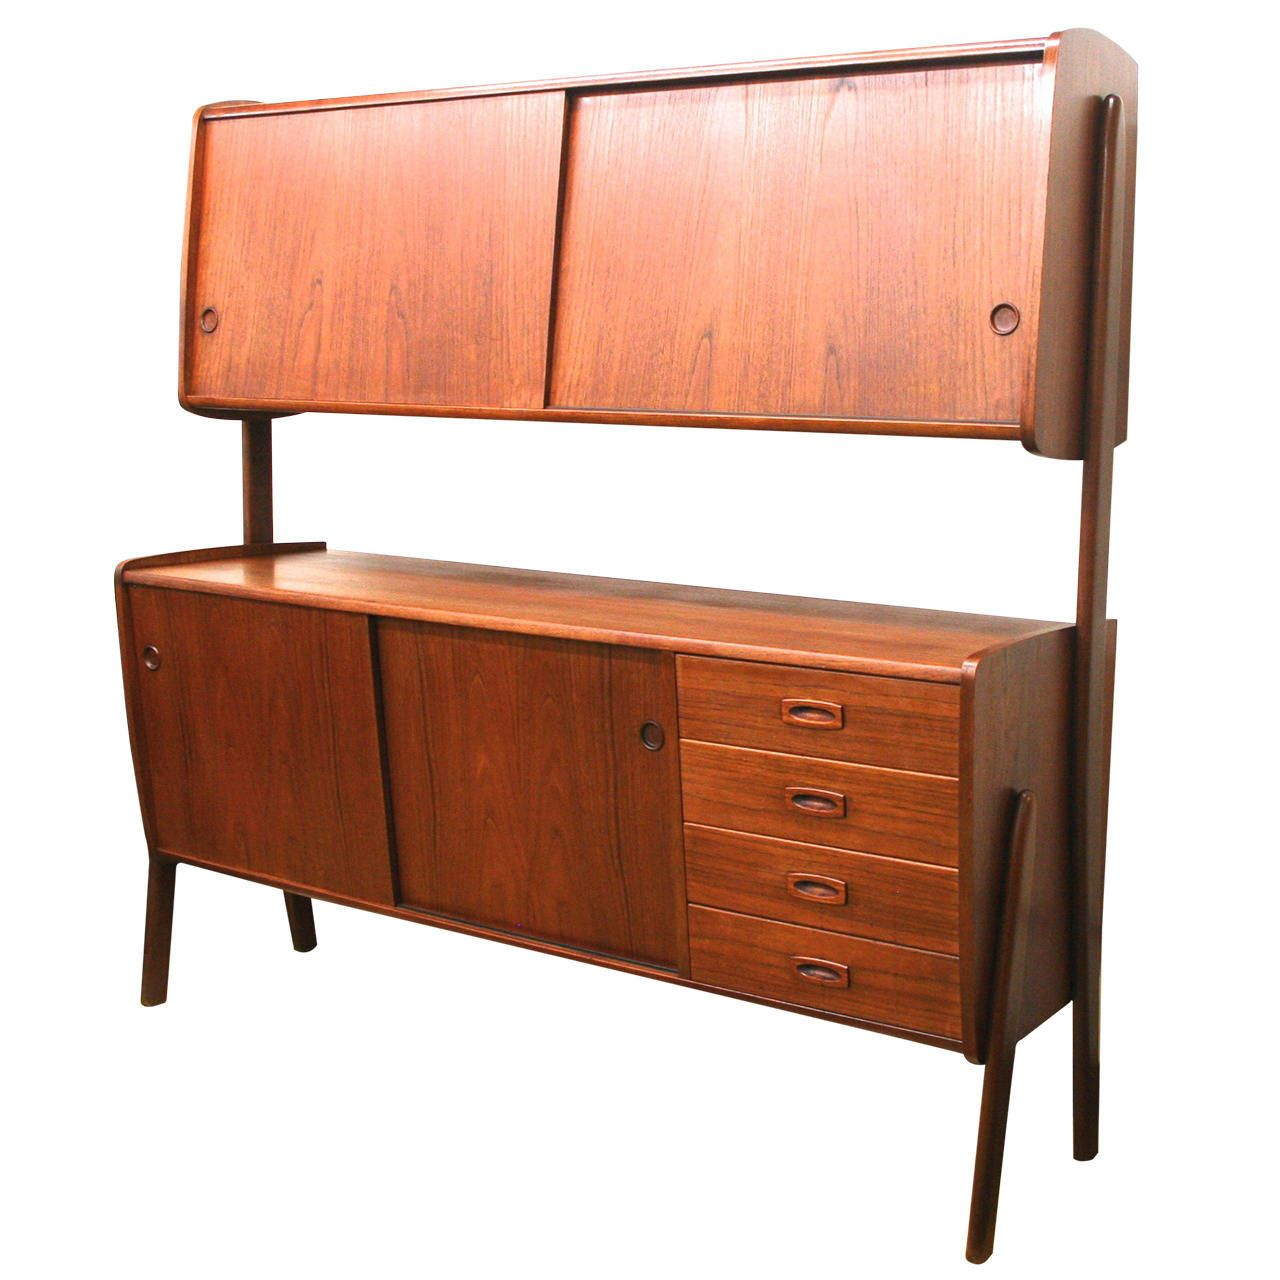 Italian Modern Teak Credenza And Dry Bar Home Improvement within dimensions 1280 X 1280